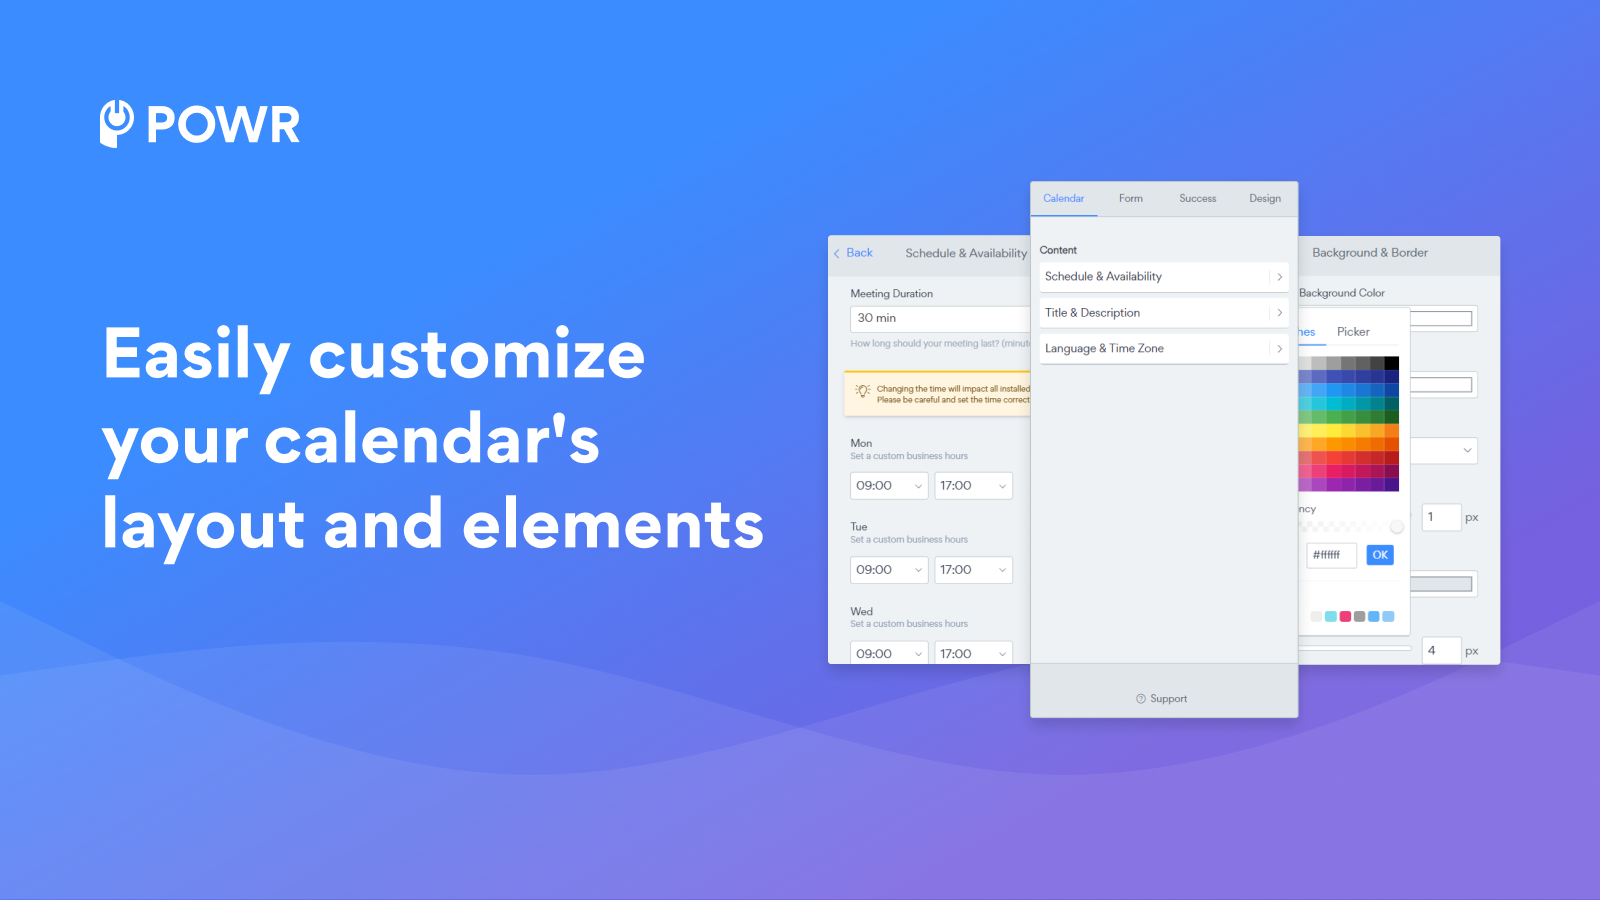 Easily customize your calendar's layout and elements.